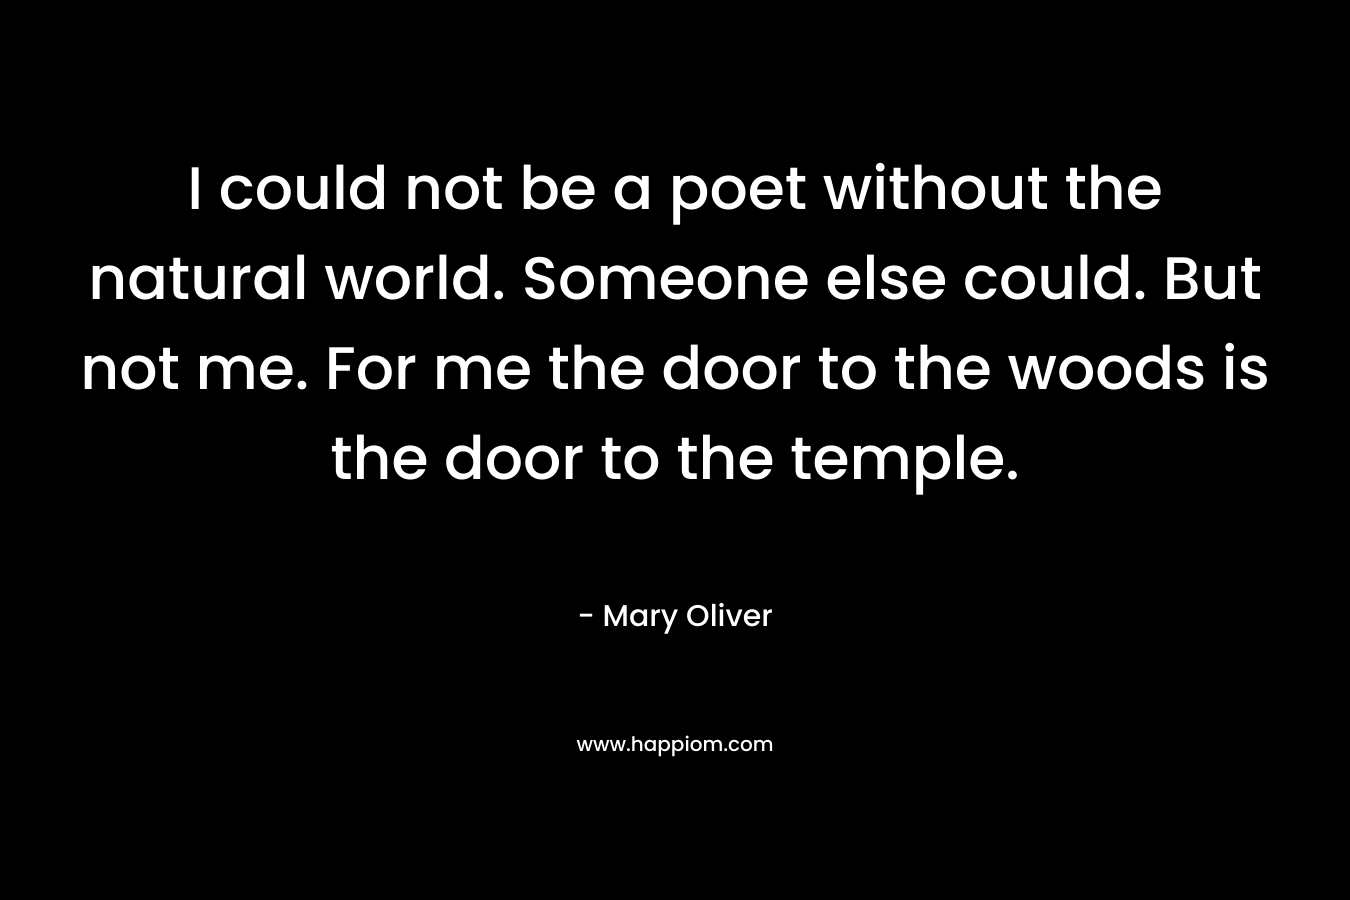 I could not be a poet without the natural world. Someone else could. But not me. For me the door to the woods is the door to the temple.